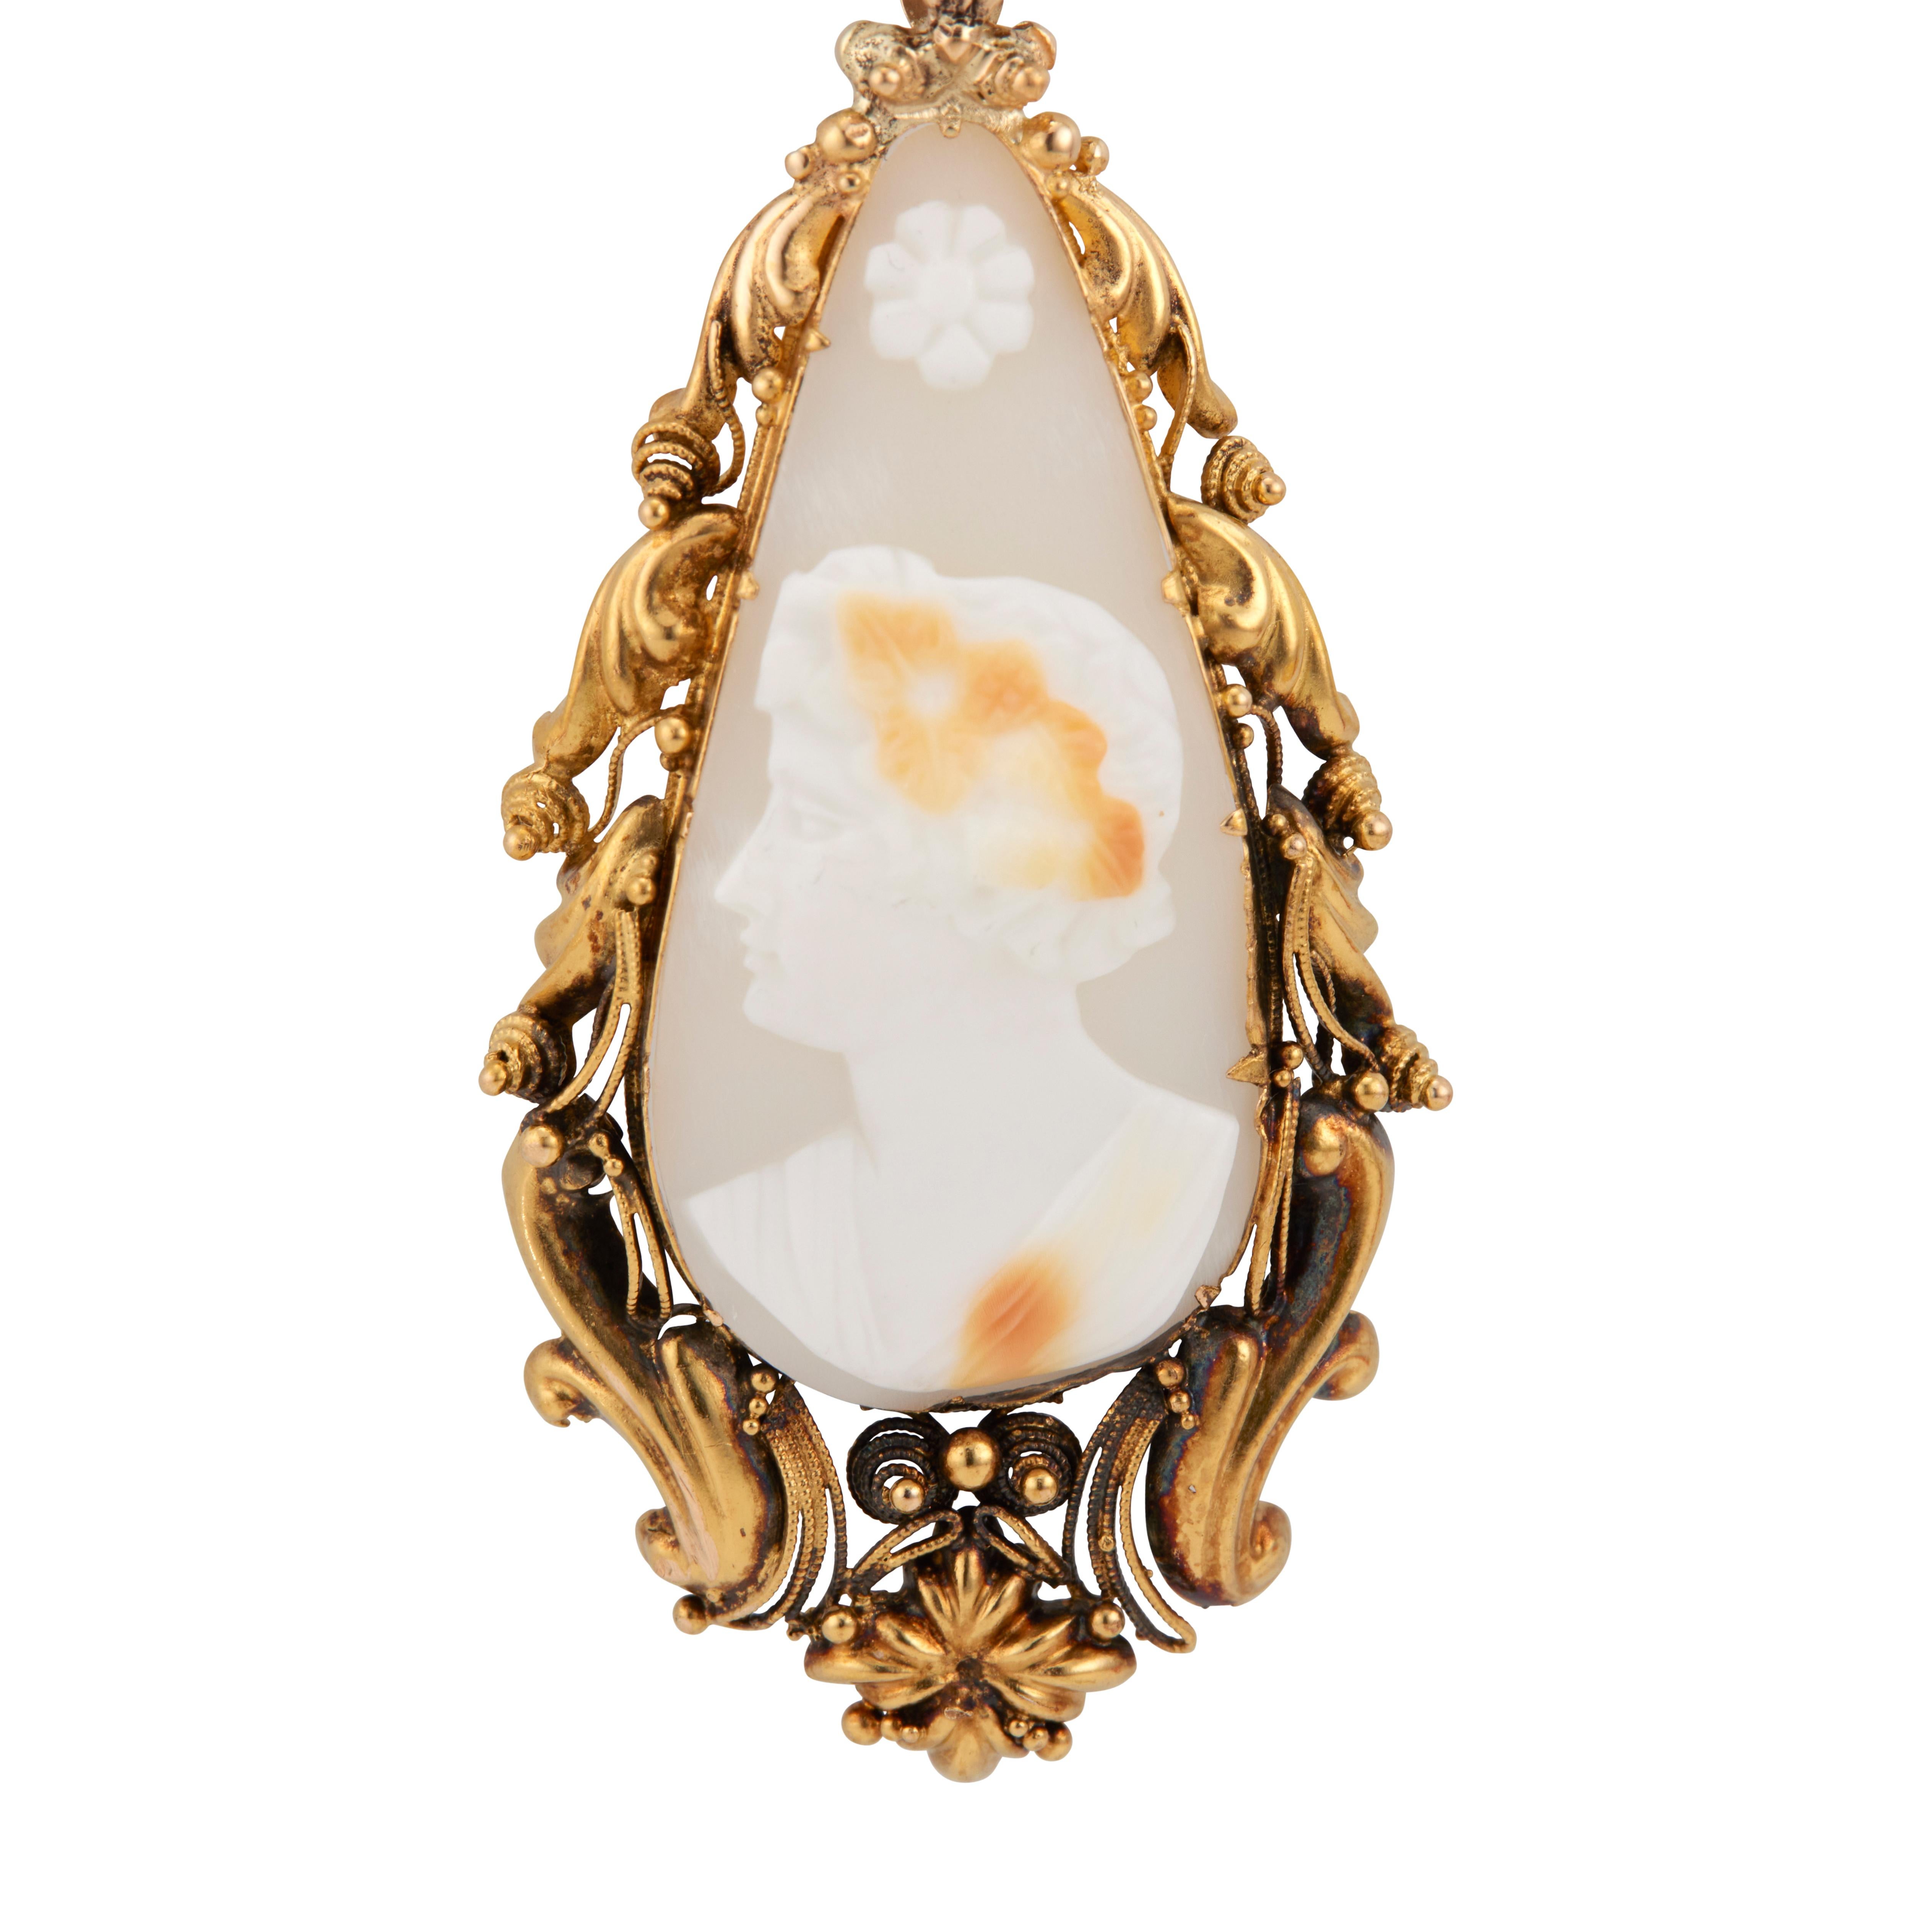 1820's Cameo pendant necklace. All original handmade pendant, circa 1820. Tear drop shaped, hand formed using chasing, repose and delicate twisted wire techniques all around the frame. The frame holds a translucent multi color shell carving of a